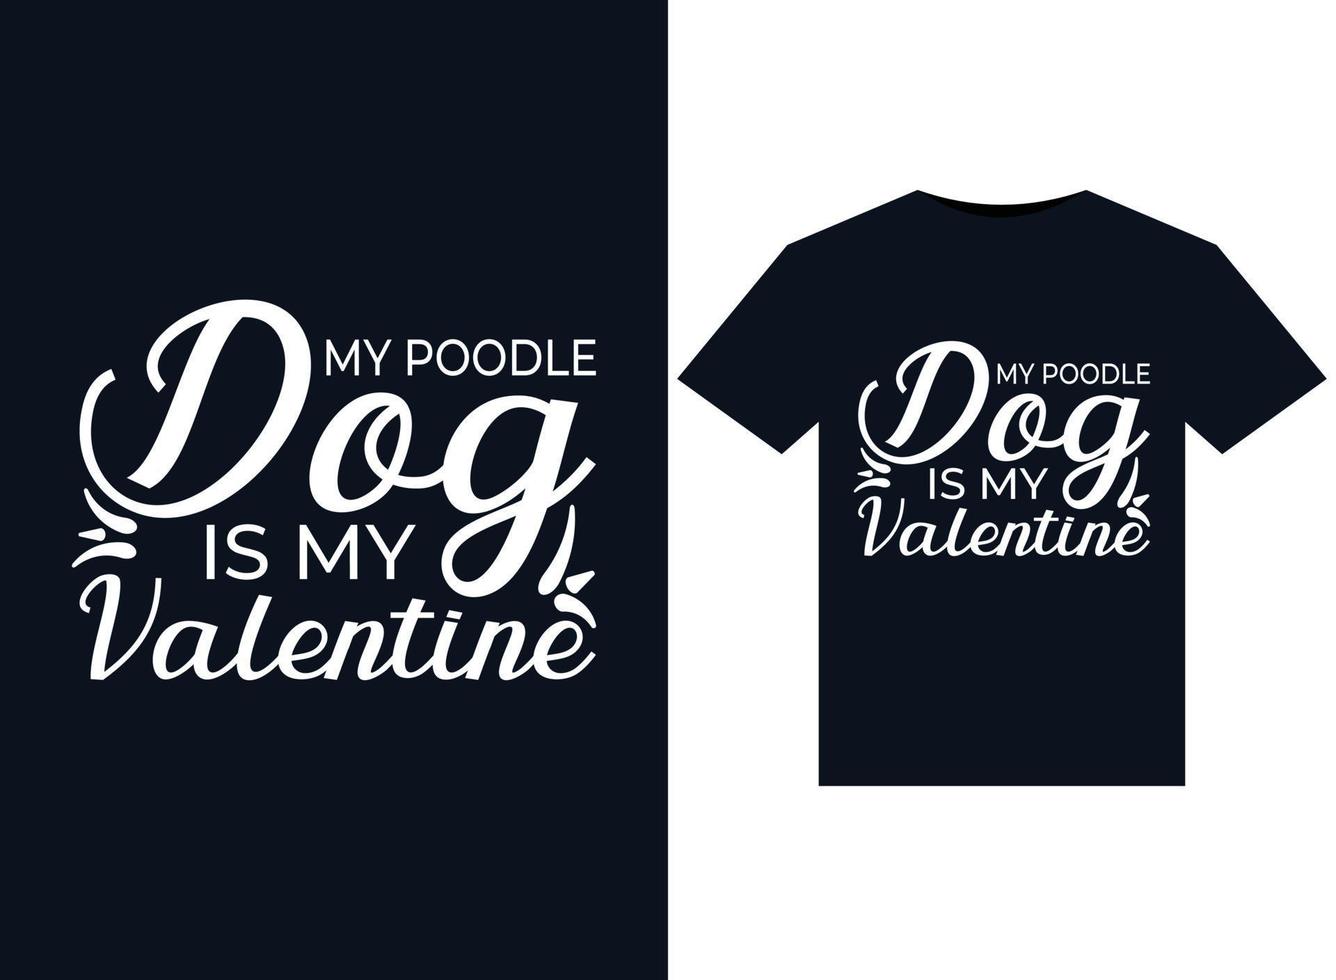 My Poodle Dog Is My Valentine illustrations for print-ready T-Shirts design vector